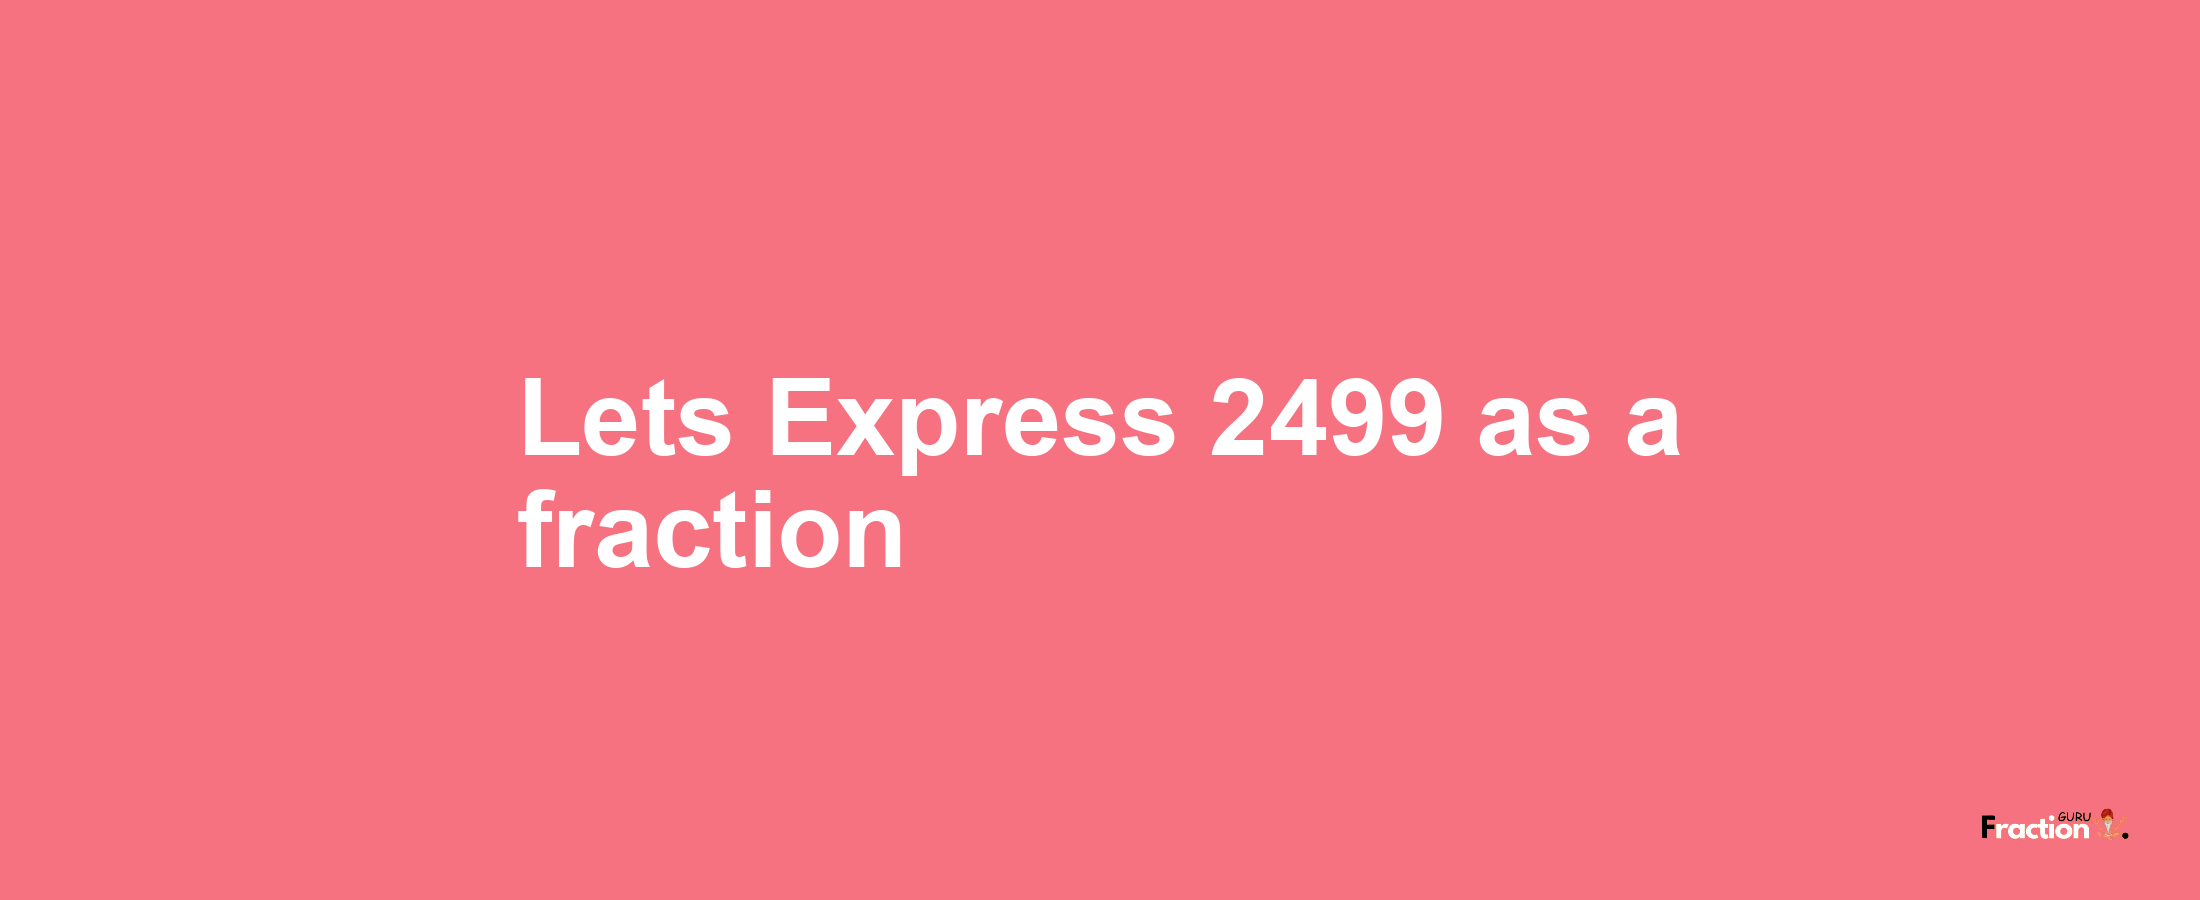 Lets Express 2499 as afraction